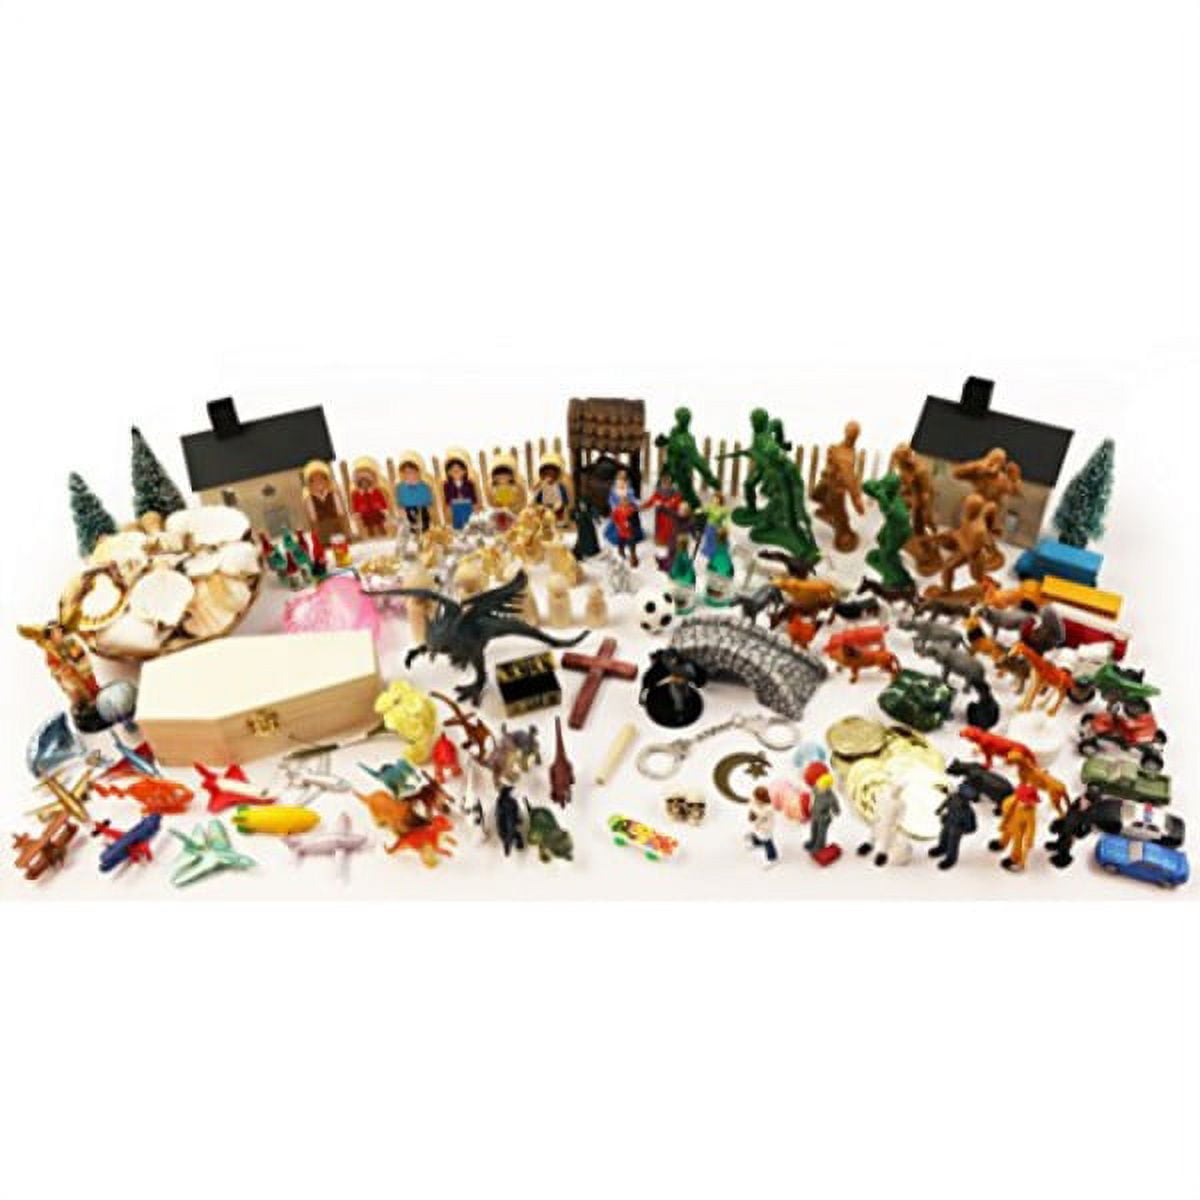 Deluxe Desktop Sandtray Kit Deluxe Desktop Sandtray Kit [] - $99.99 :  , Affordable Toys for Play Therapy